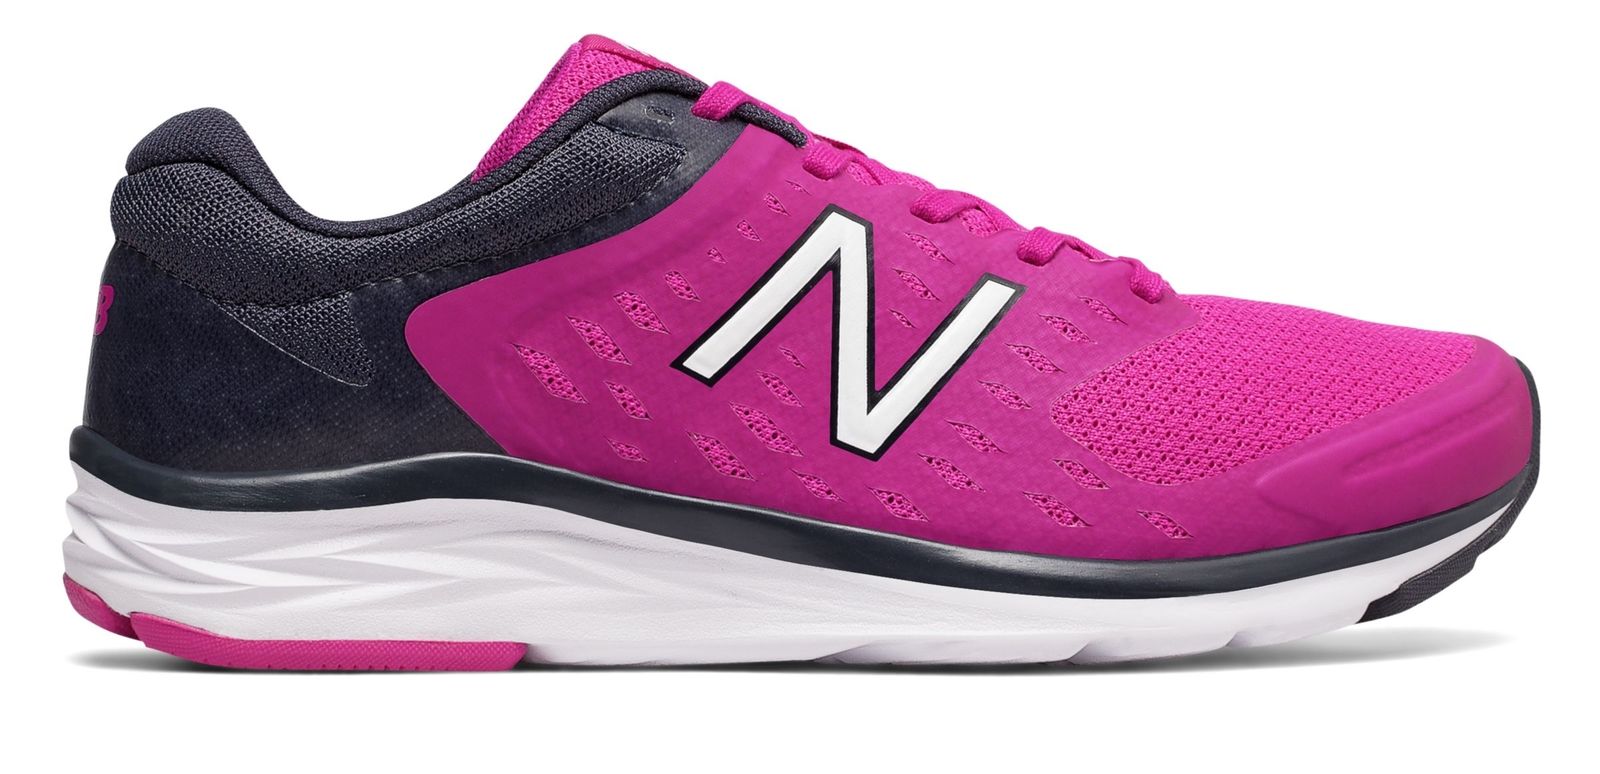 New Balance women’s 490v5 athletic shoes for $25, free shipping